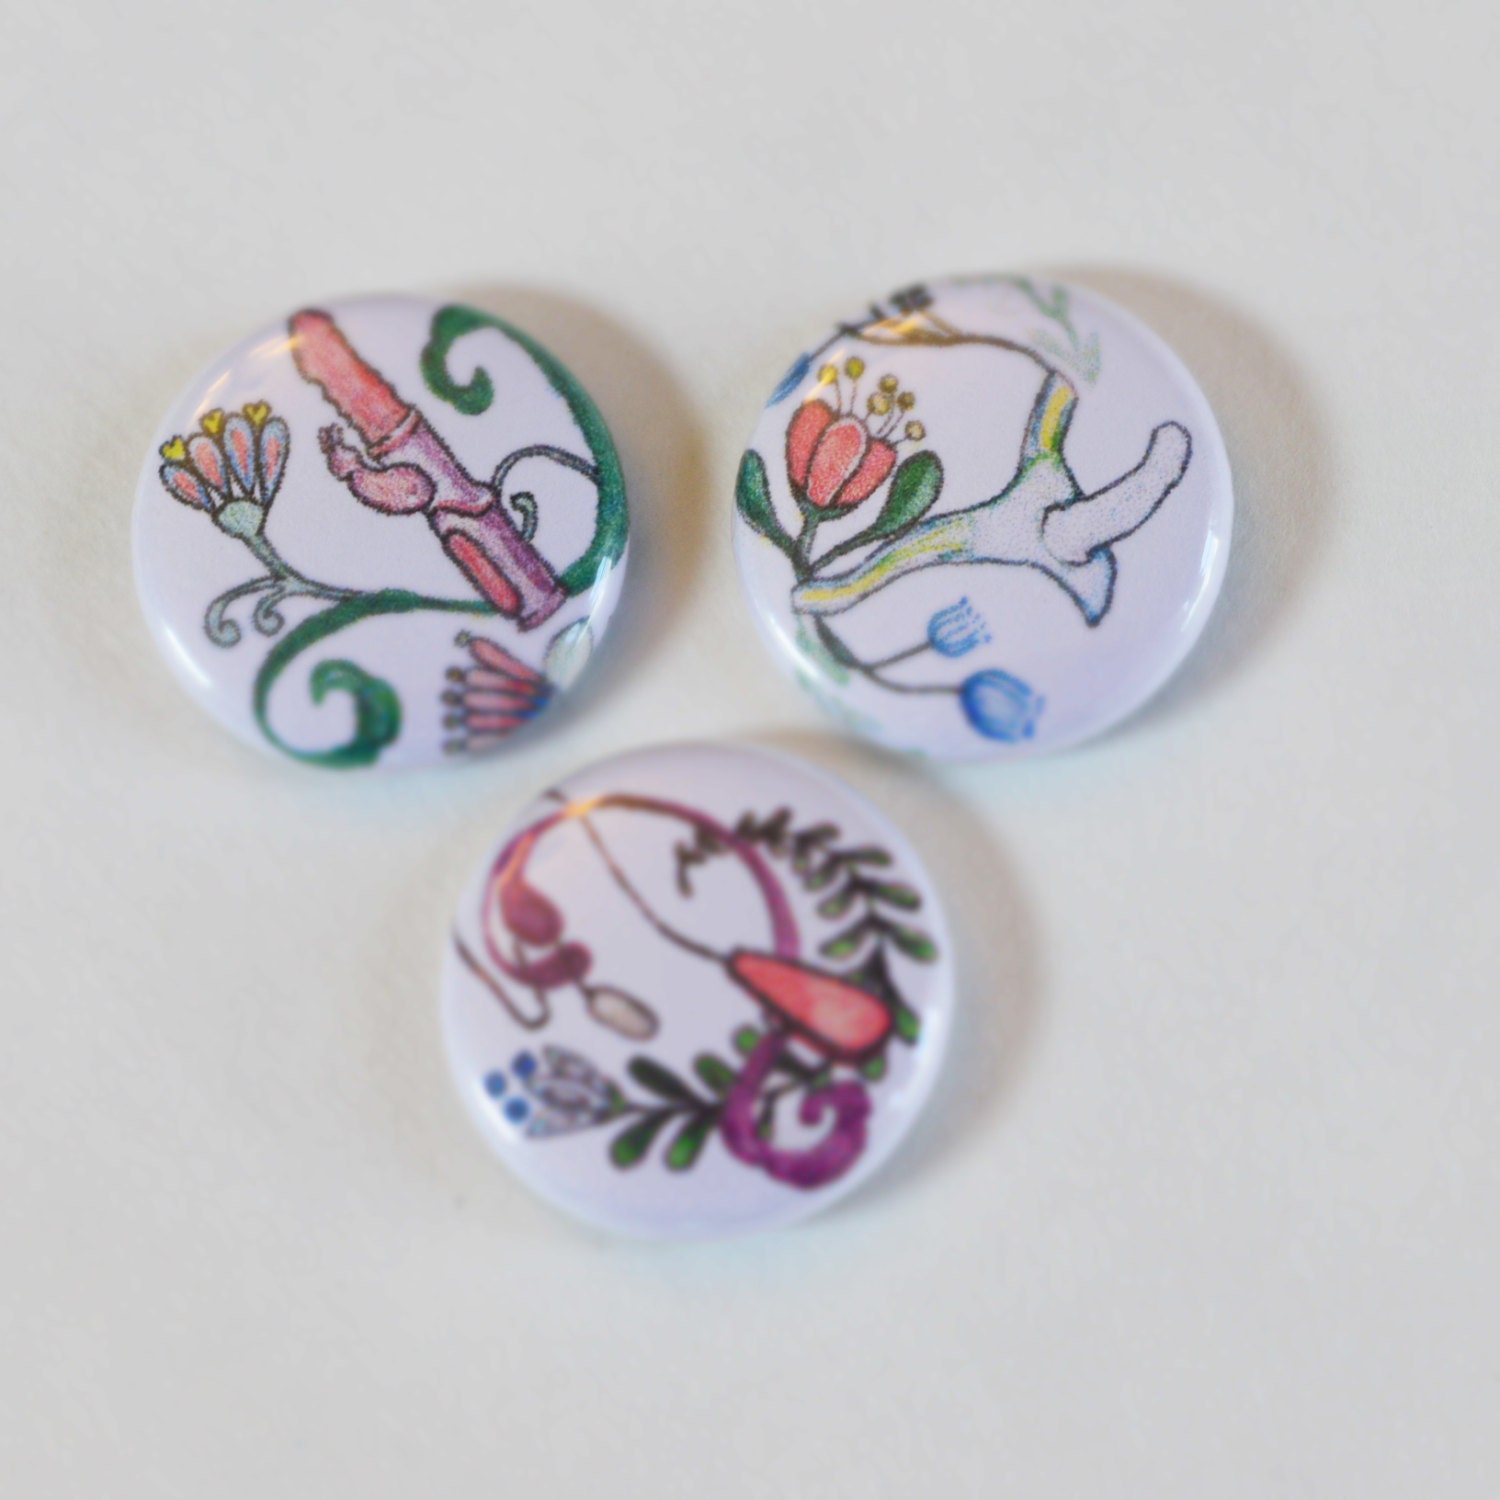 Naughty Feminist Pins Sex Toy Illustration Buttons Free Download Nude